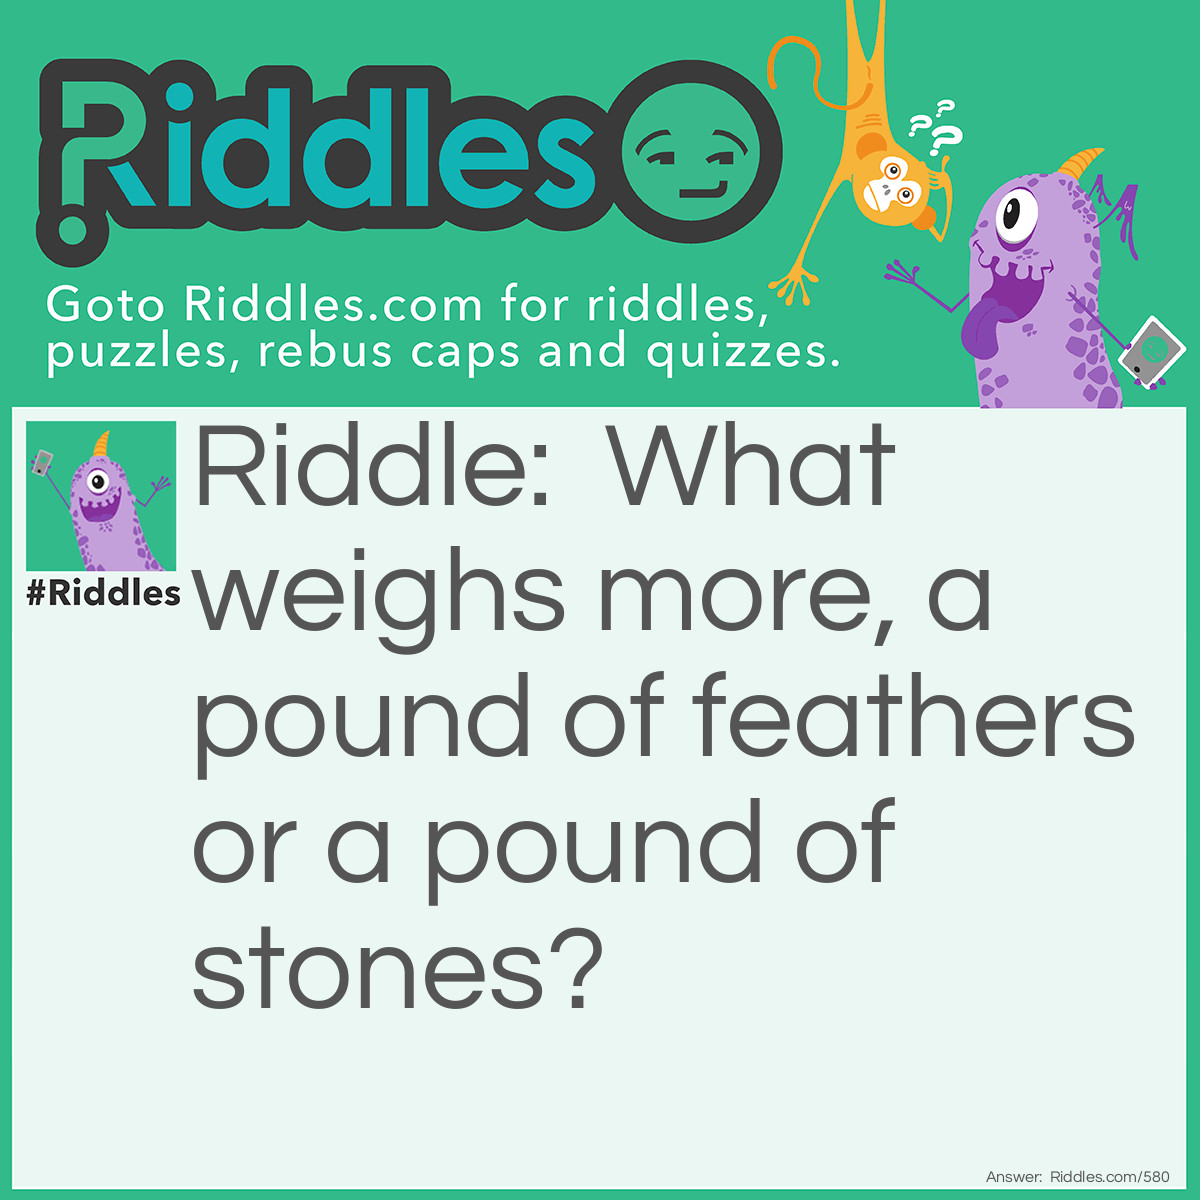 Riddle: What weighs more, a pound of <a href="/post/50/chicken-riddles">feathers</a> or a pound of stones? Answer: The same. They both weigh a pound!